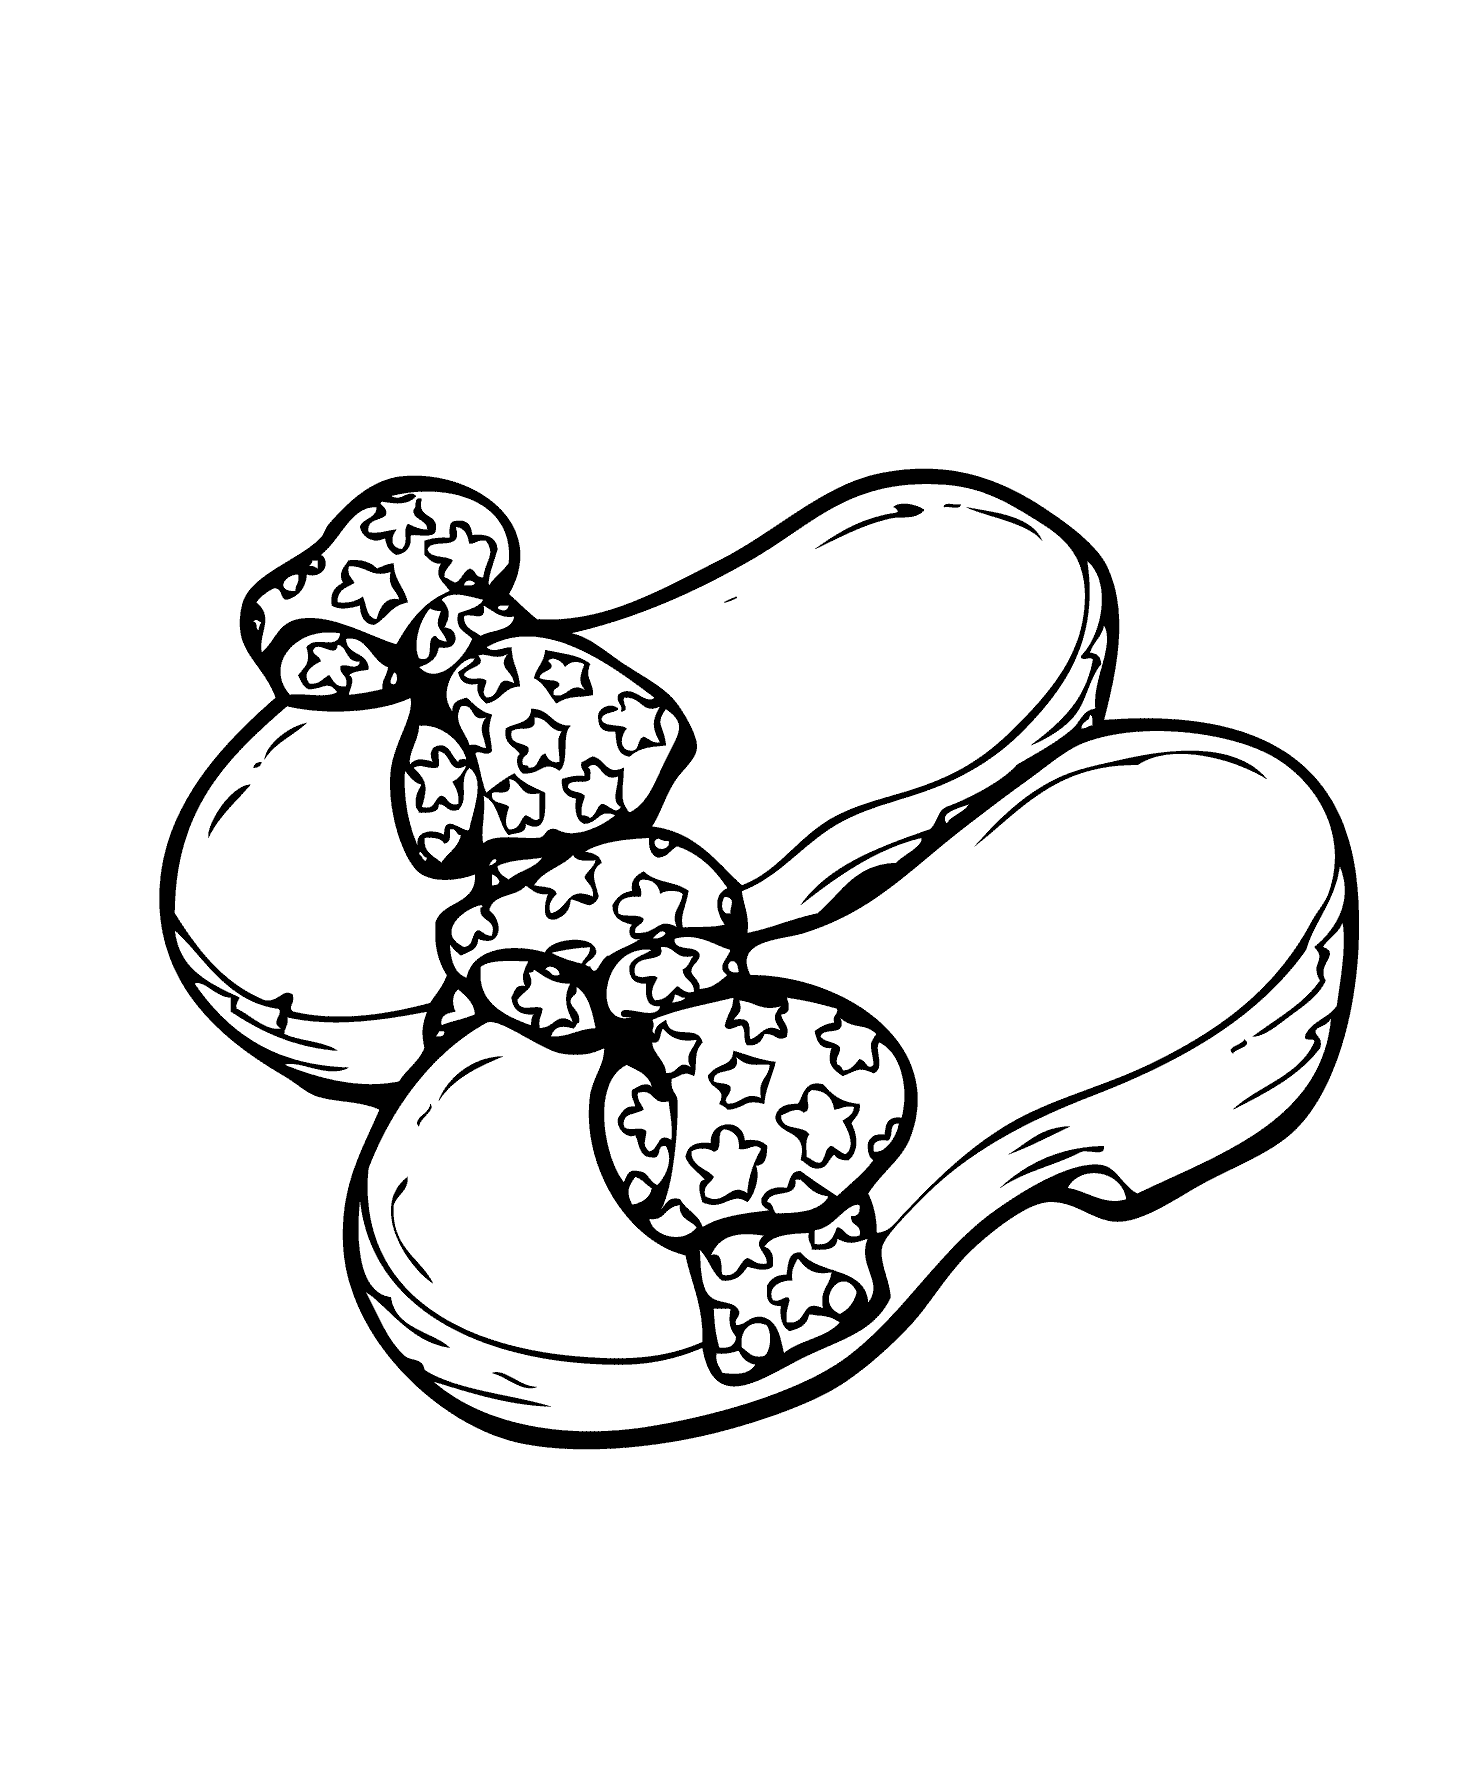 Shoes 03 Coloring Page